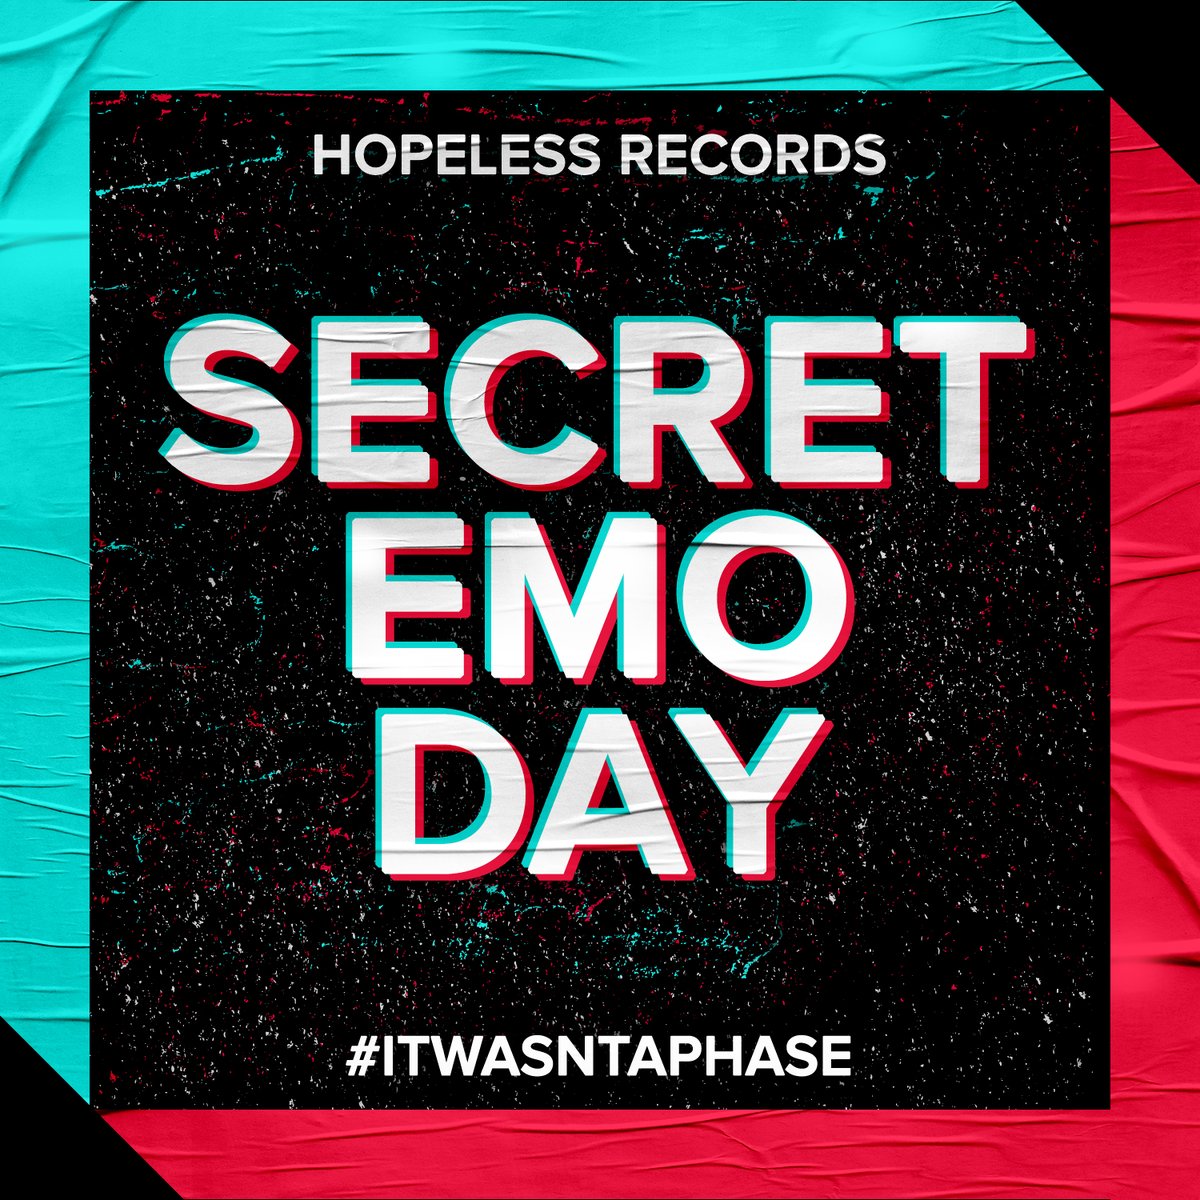 Day 4 of  #EmoWeek and we are coming in HOT with some emo accusations On this Secret Emo Day, we will be speculating wildly on which of our favorite brand mascots DEFINITELY had an emo phase that they don't talk about  #ItWasntAPhase